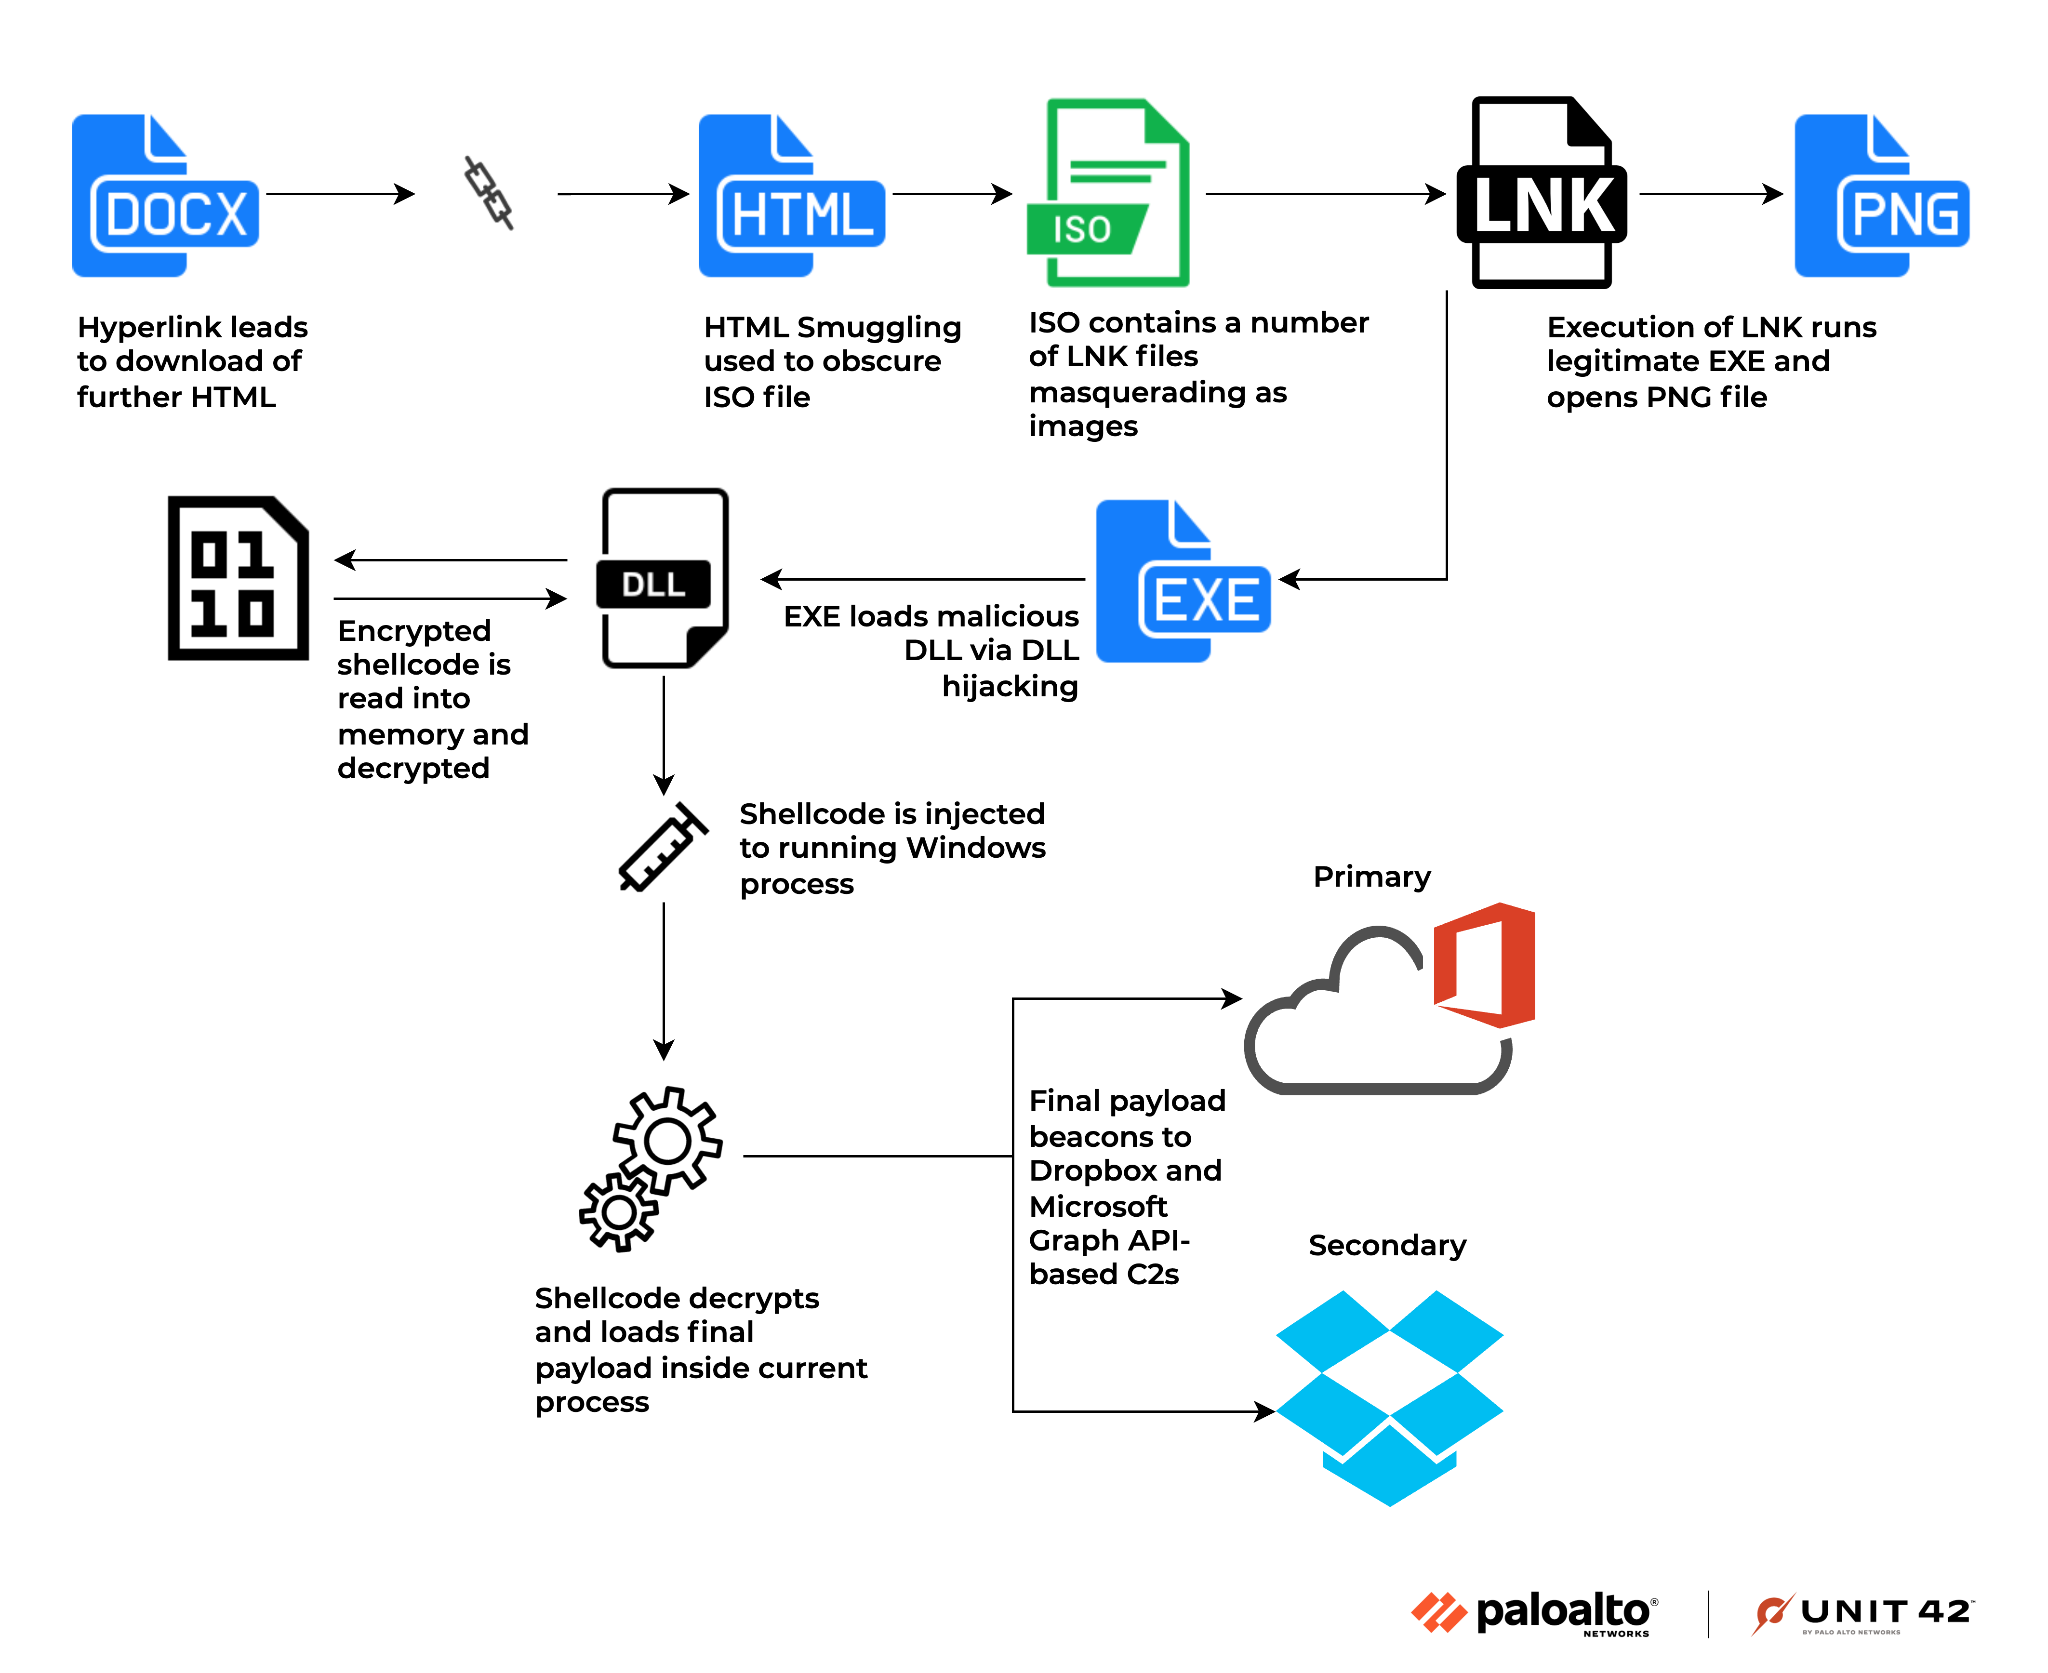 Image 3 is the execution flow chart, starting with a hyperlink that leads to a download of further HTML, and ending with a final payload beacons to dropbox and Microsoft graph, API-based command and controls (C2).